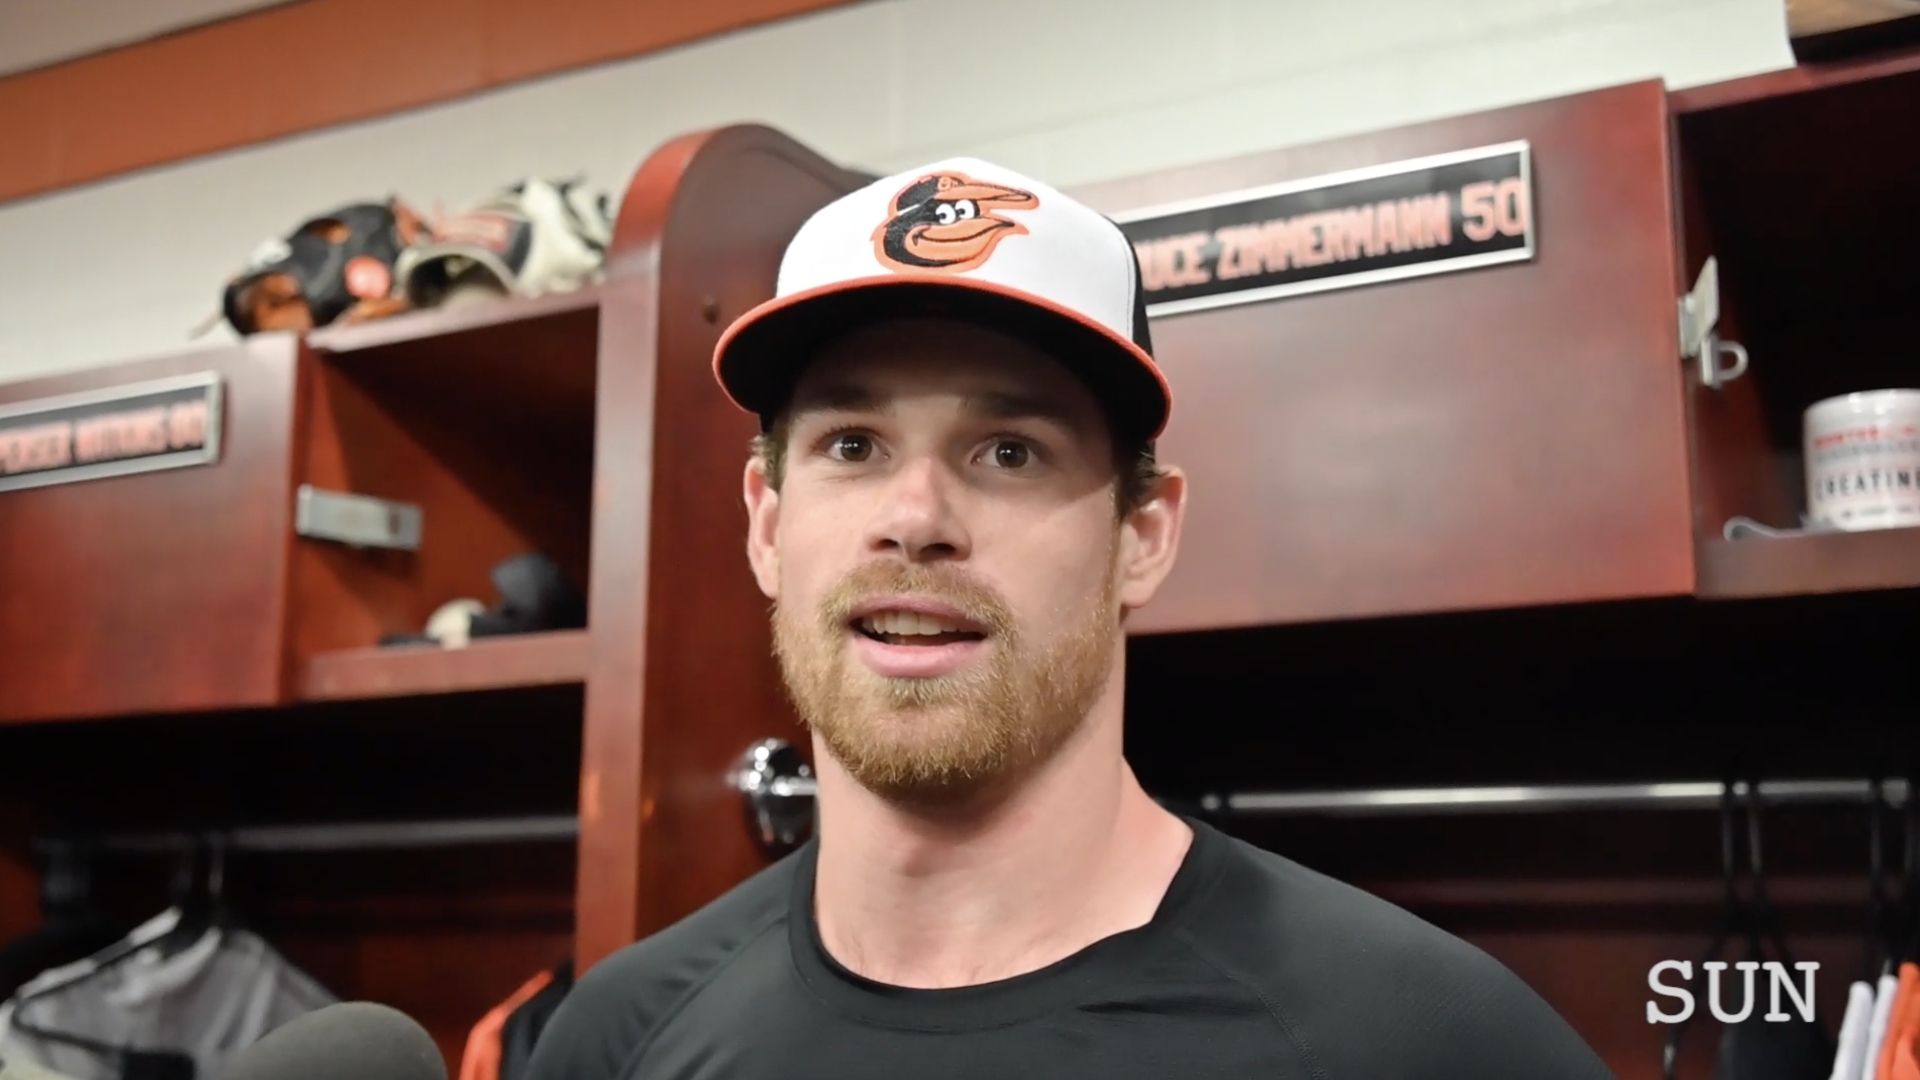 In first spring start, Bruce Zimmermann vies for Orioles rotation